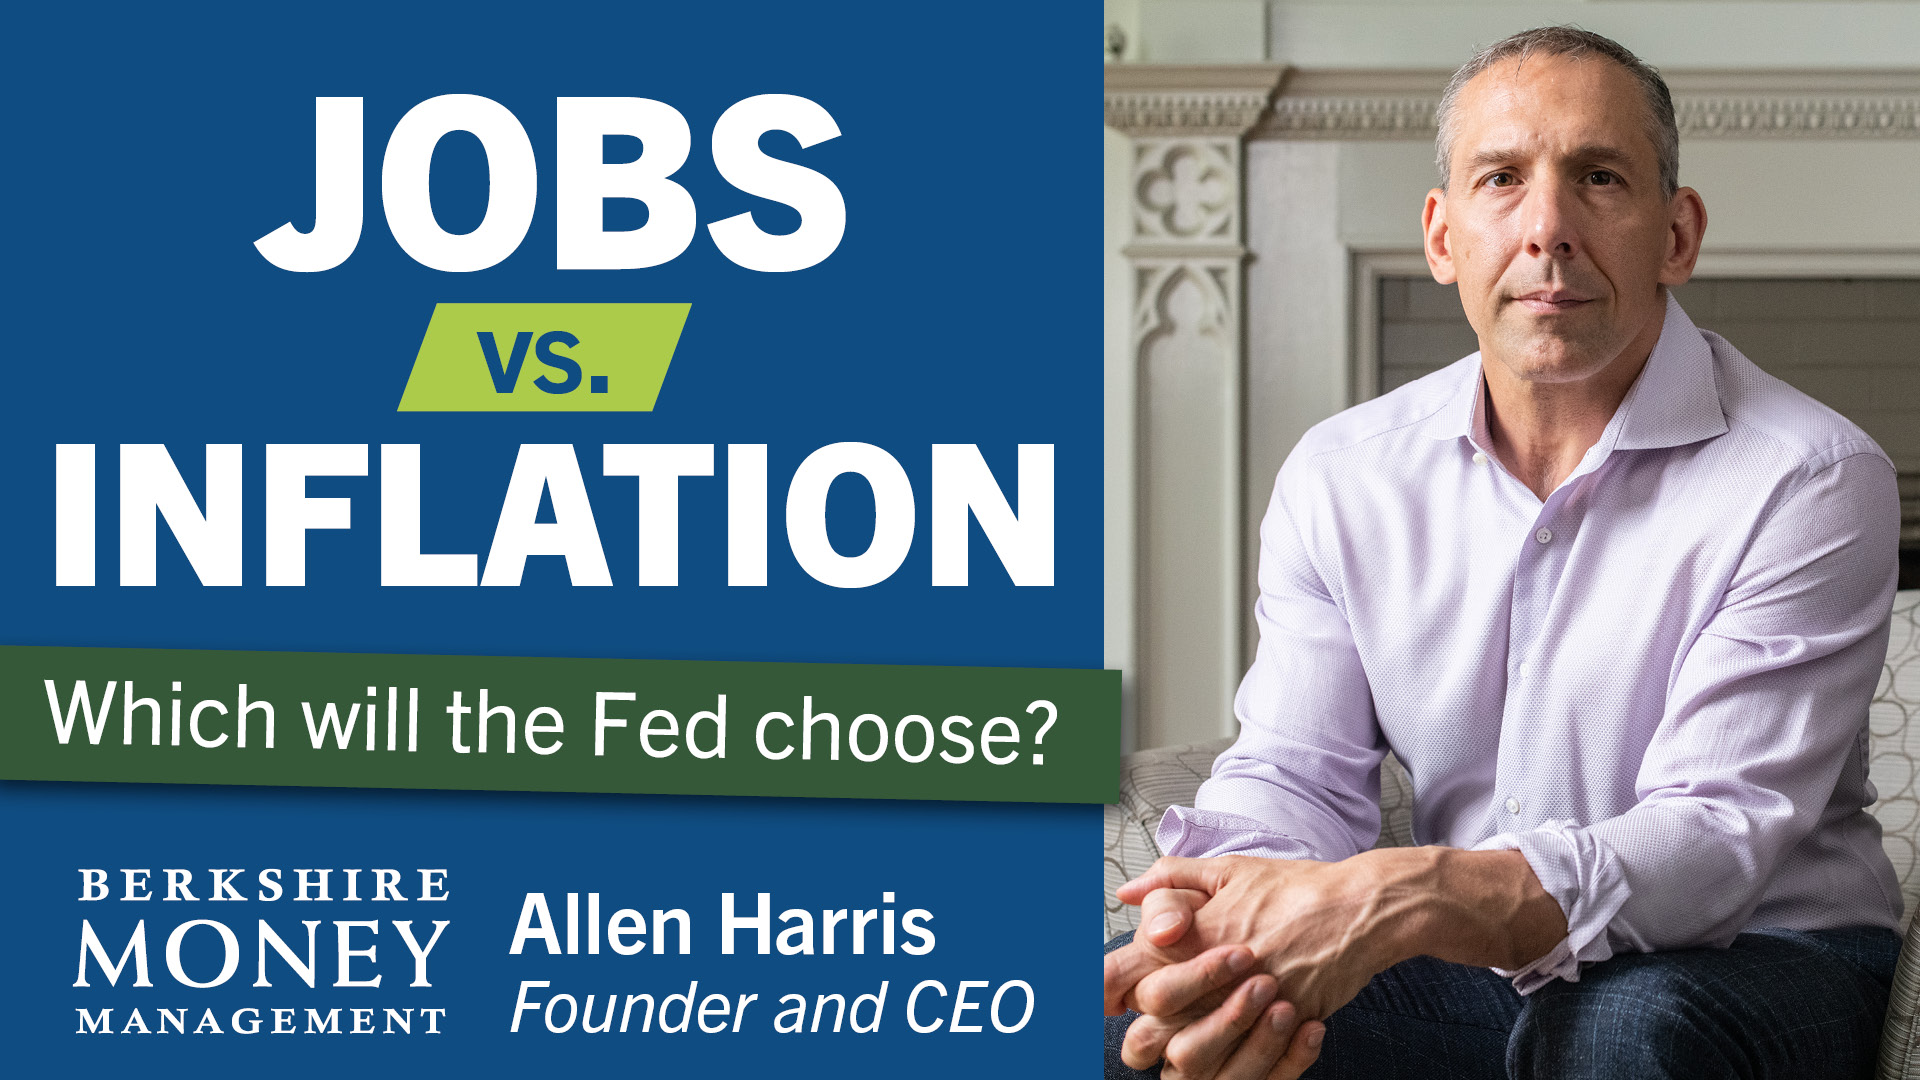 Jobs vs. Inflation. Which will the Fed choose?